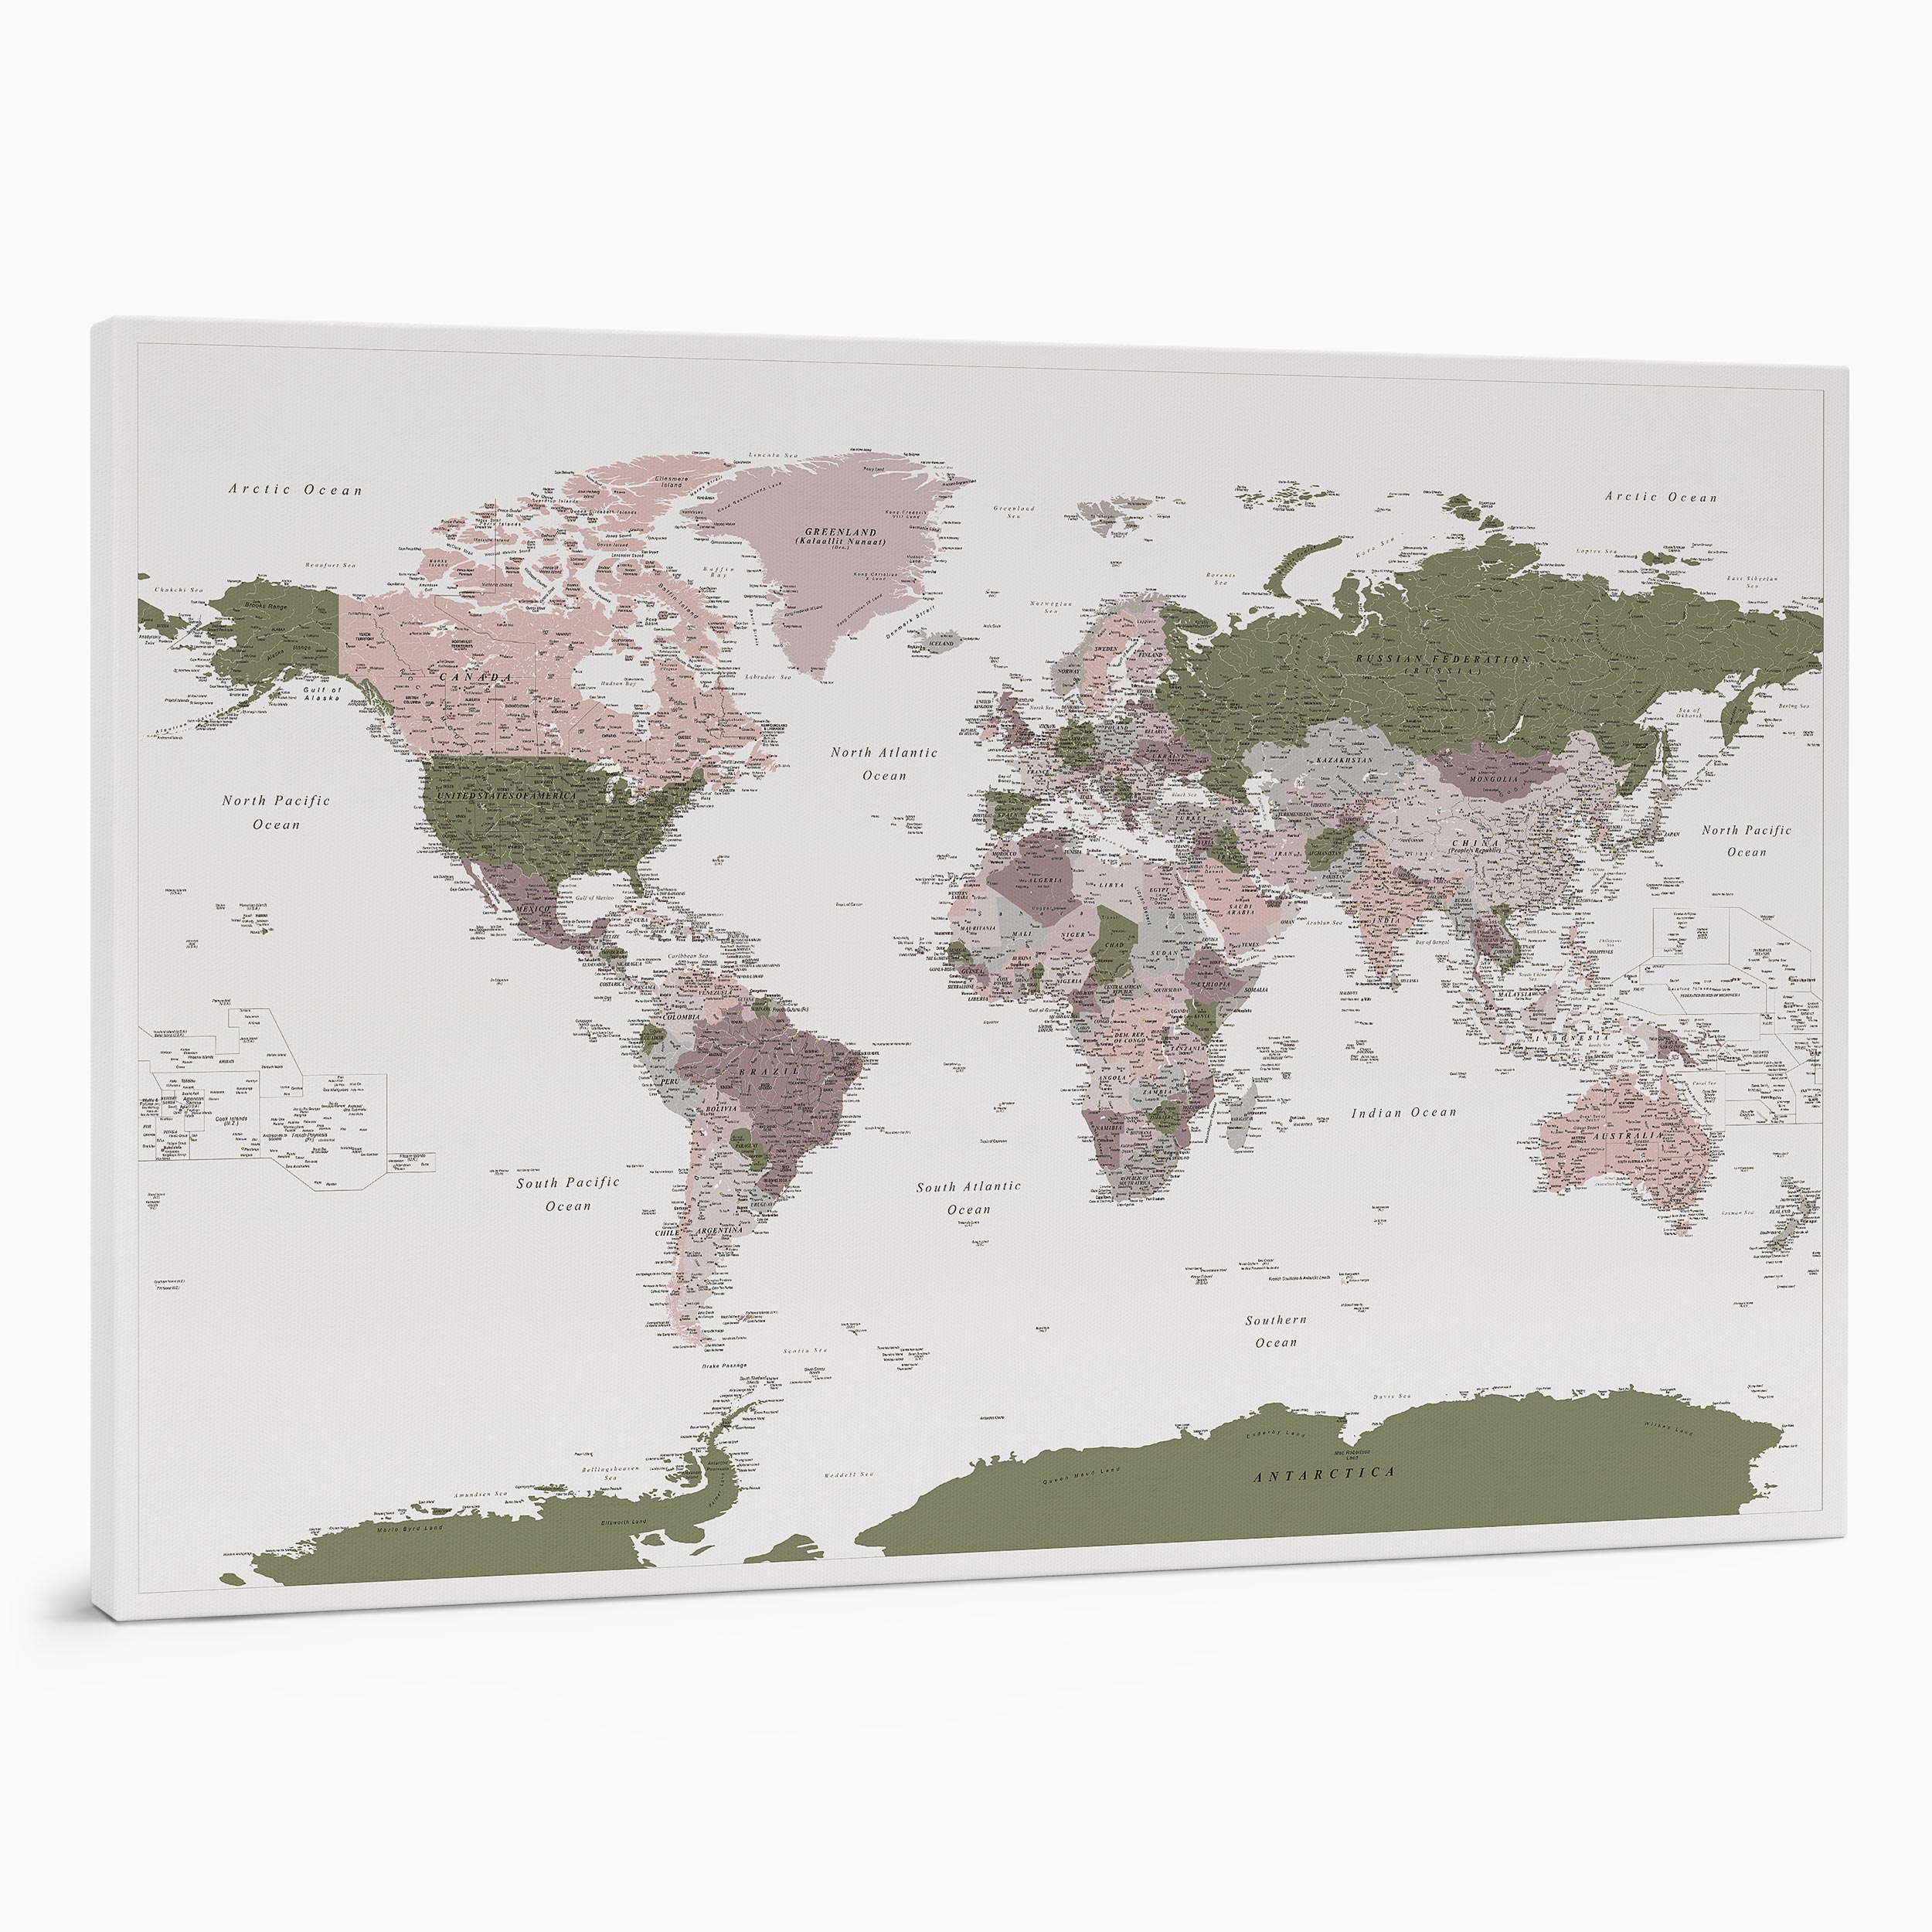 15P large push pin world map to track places visited on canvas green purple violet